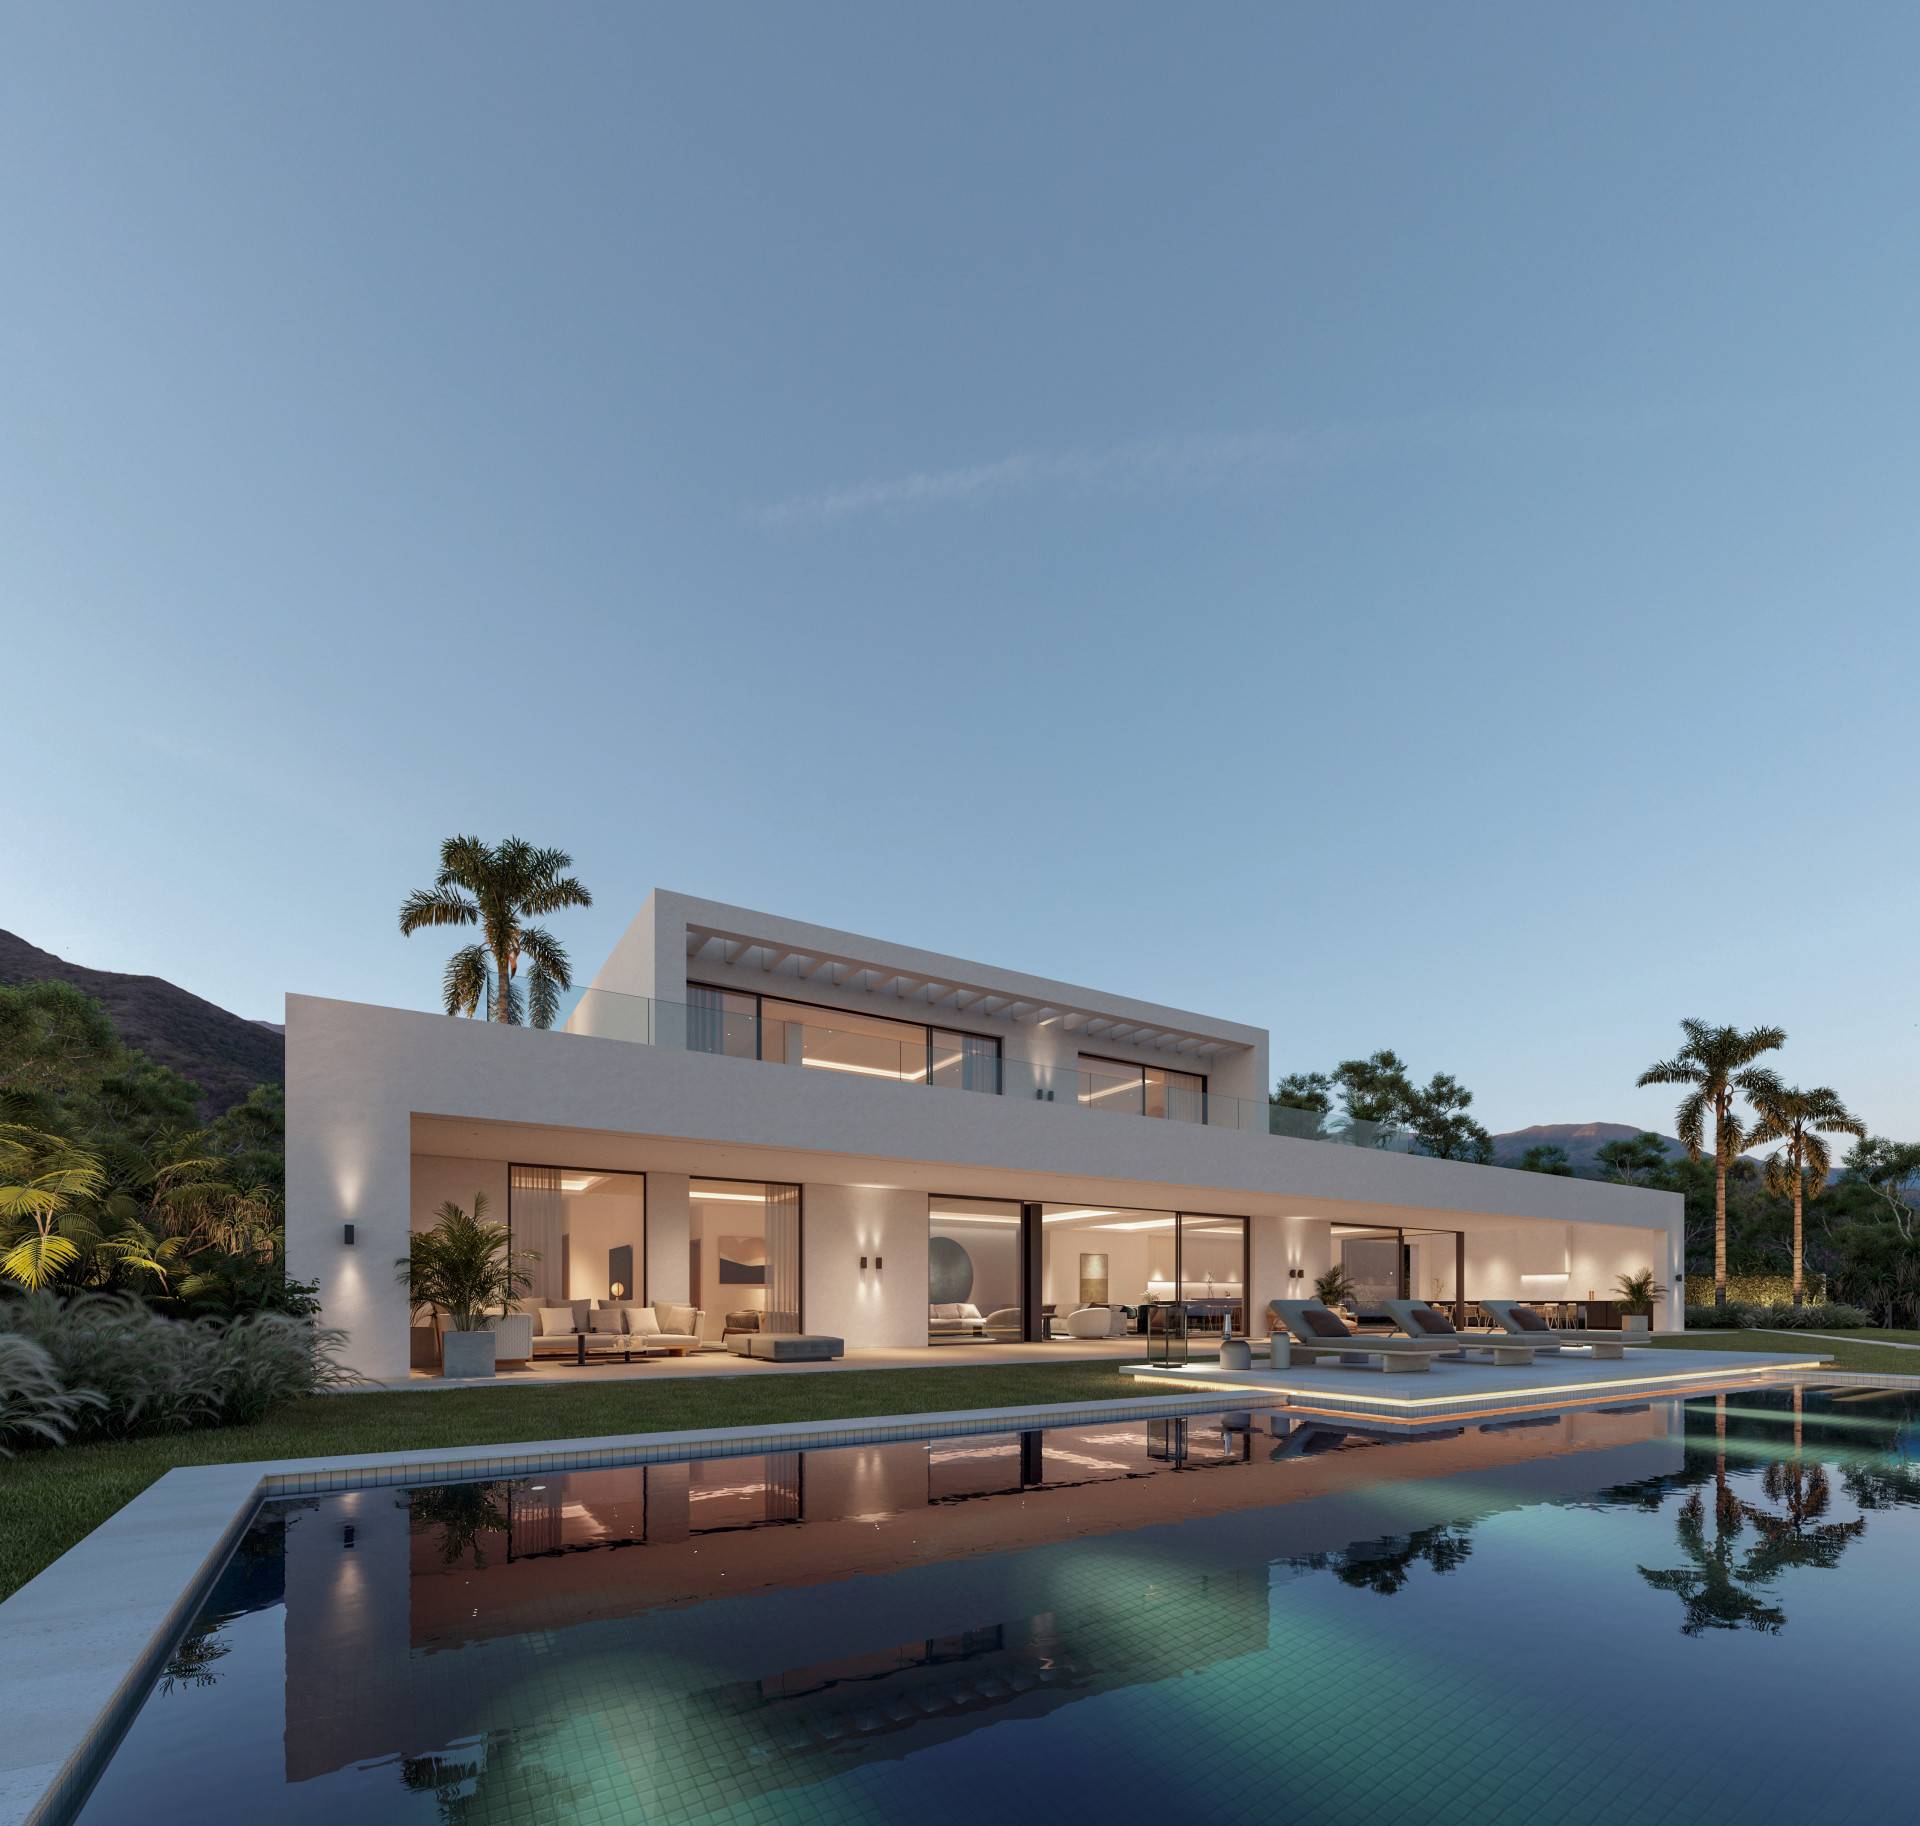 This incredible luxury villa for sale in Rocio de Nagüeles is currently under construction and expected to be ready in November 2021.